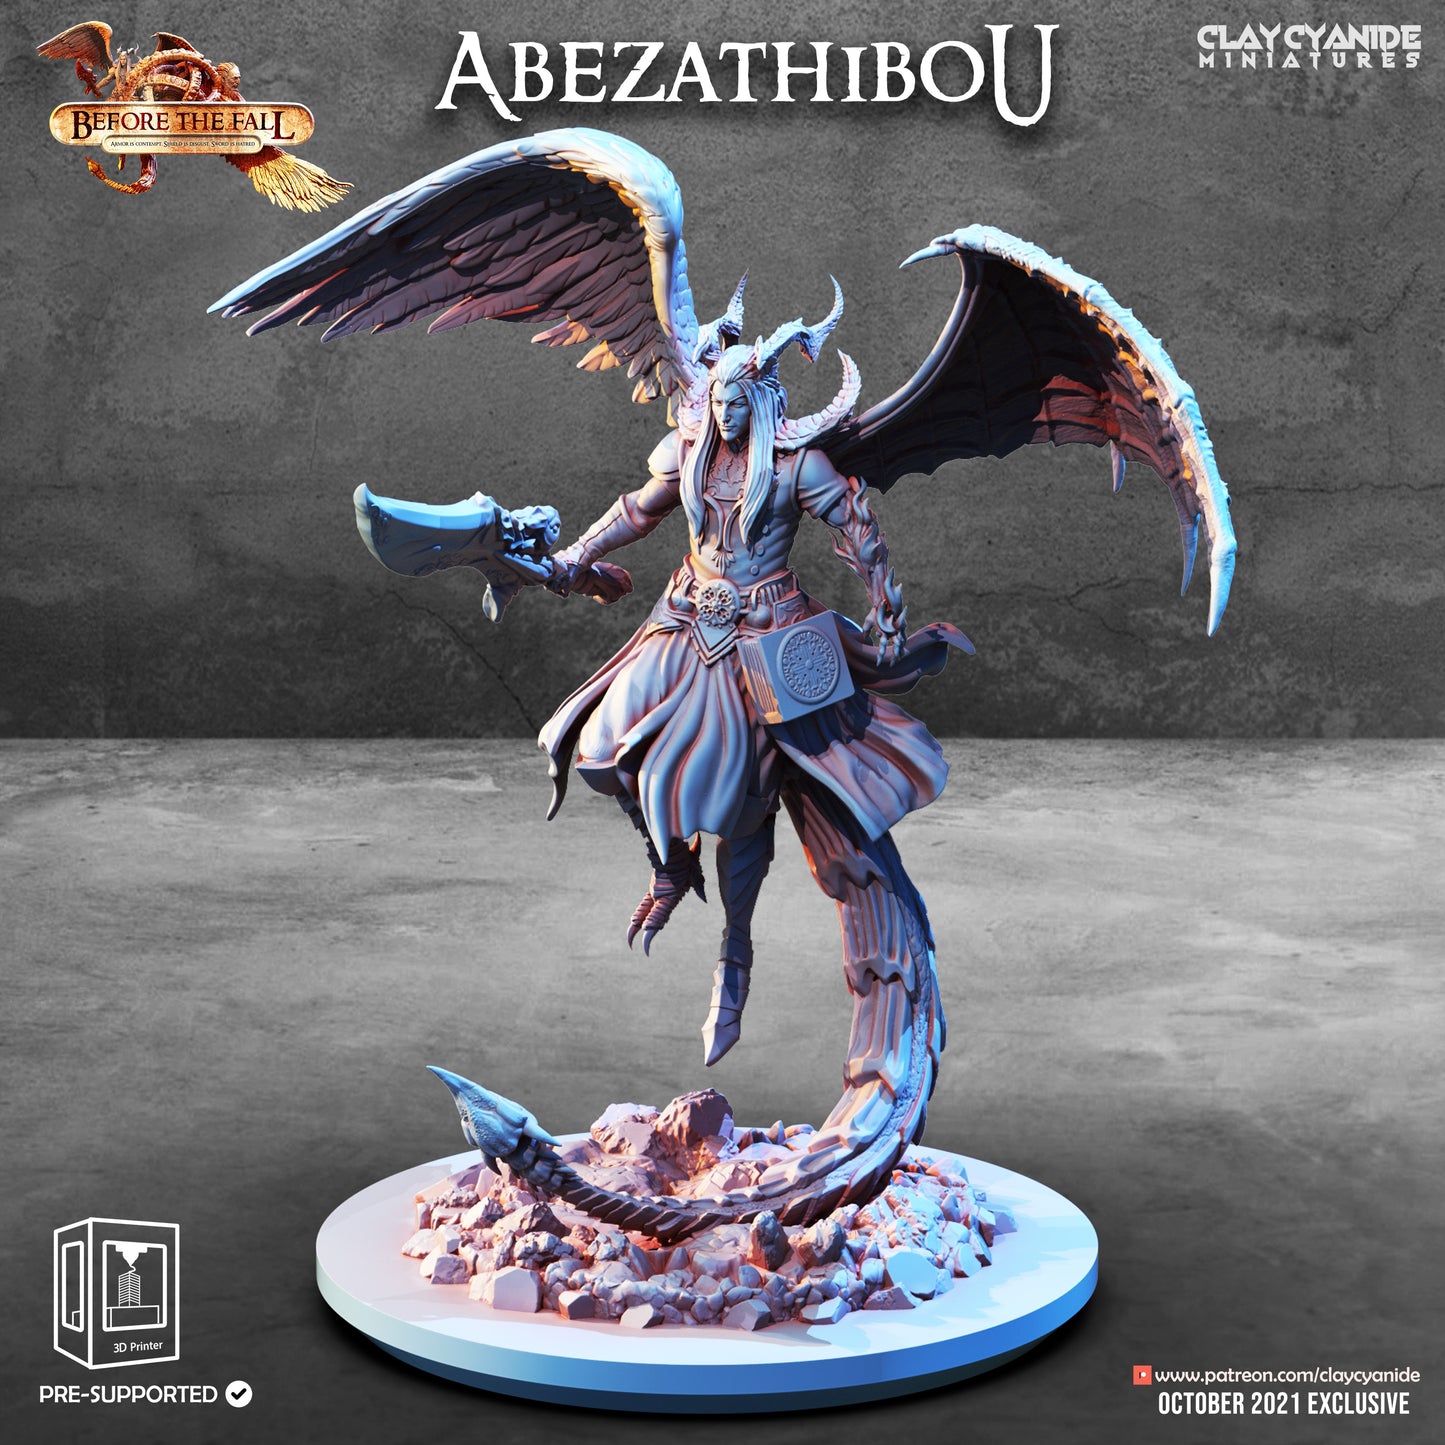 Abezathibou from the Angels - Before the Fall set